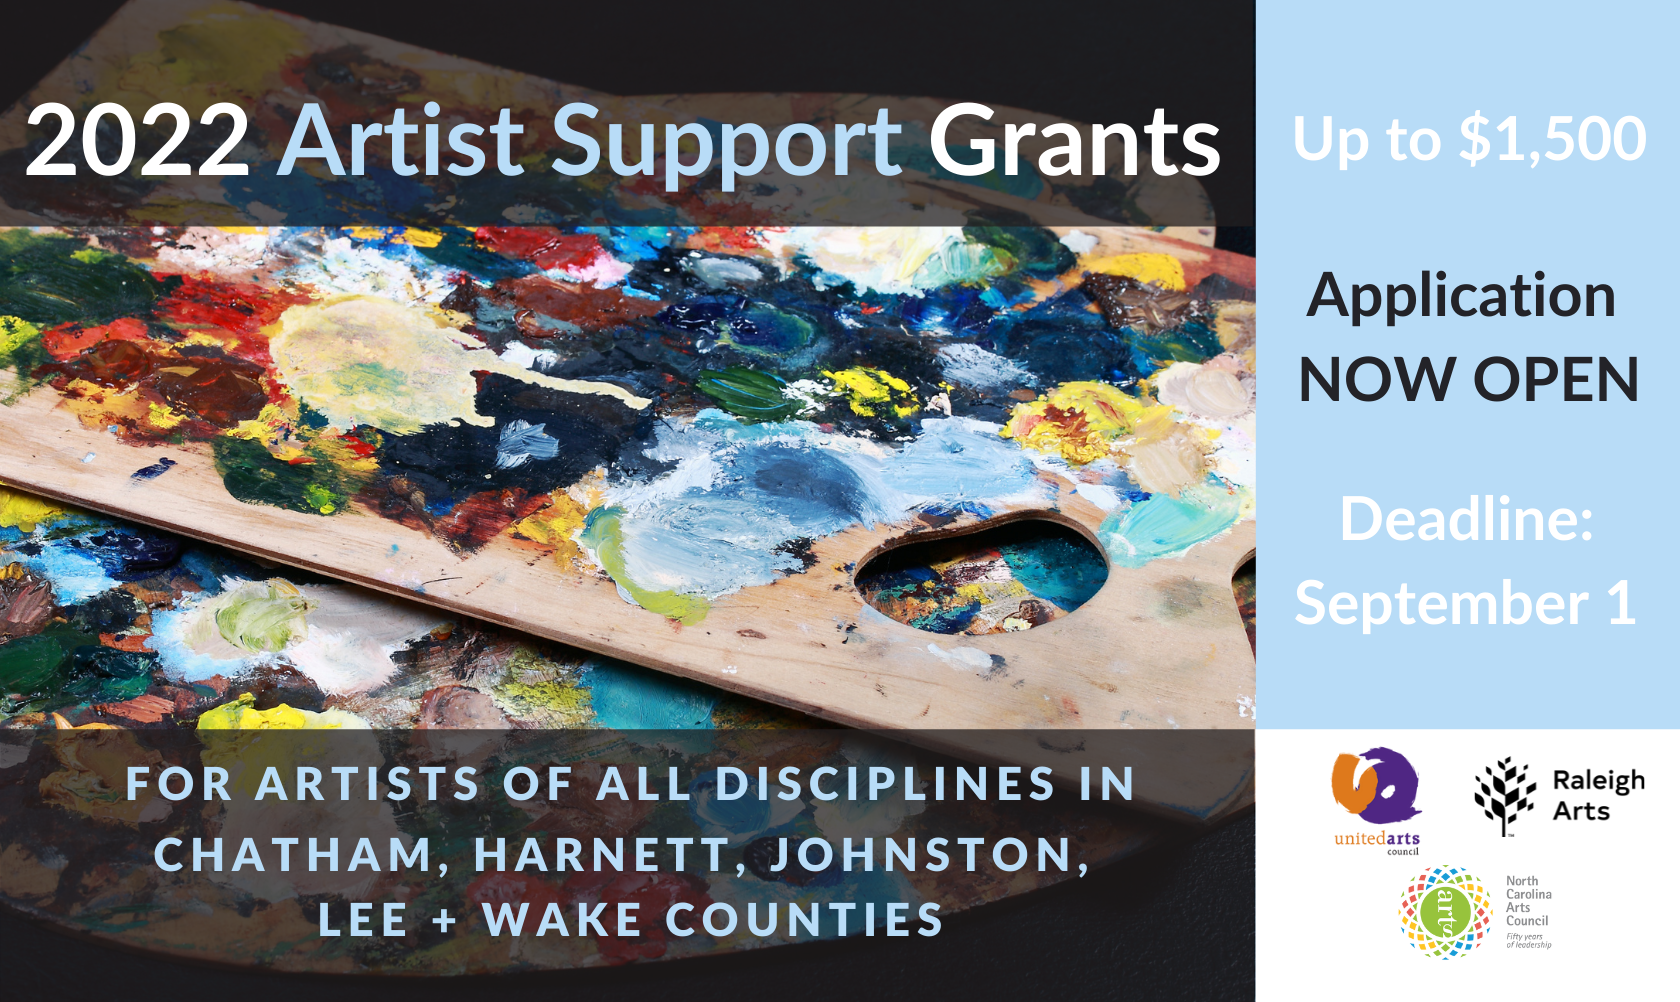 2022 Artist Support Grants Up to #1500 Application Open Now Deadline September 1 www.unitedarts.org For artists of all disciplines in Chatham Harnett Johnston Lee and Wake Counties With Logos from United Arts Council, NC Arts Council and Raleigh Arts